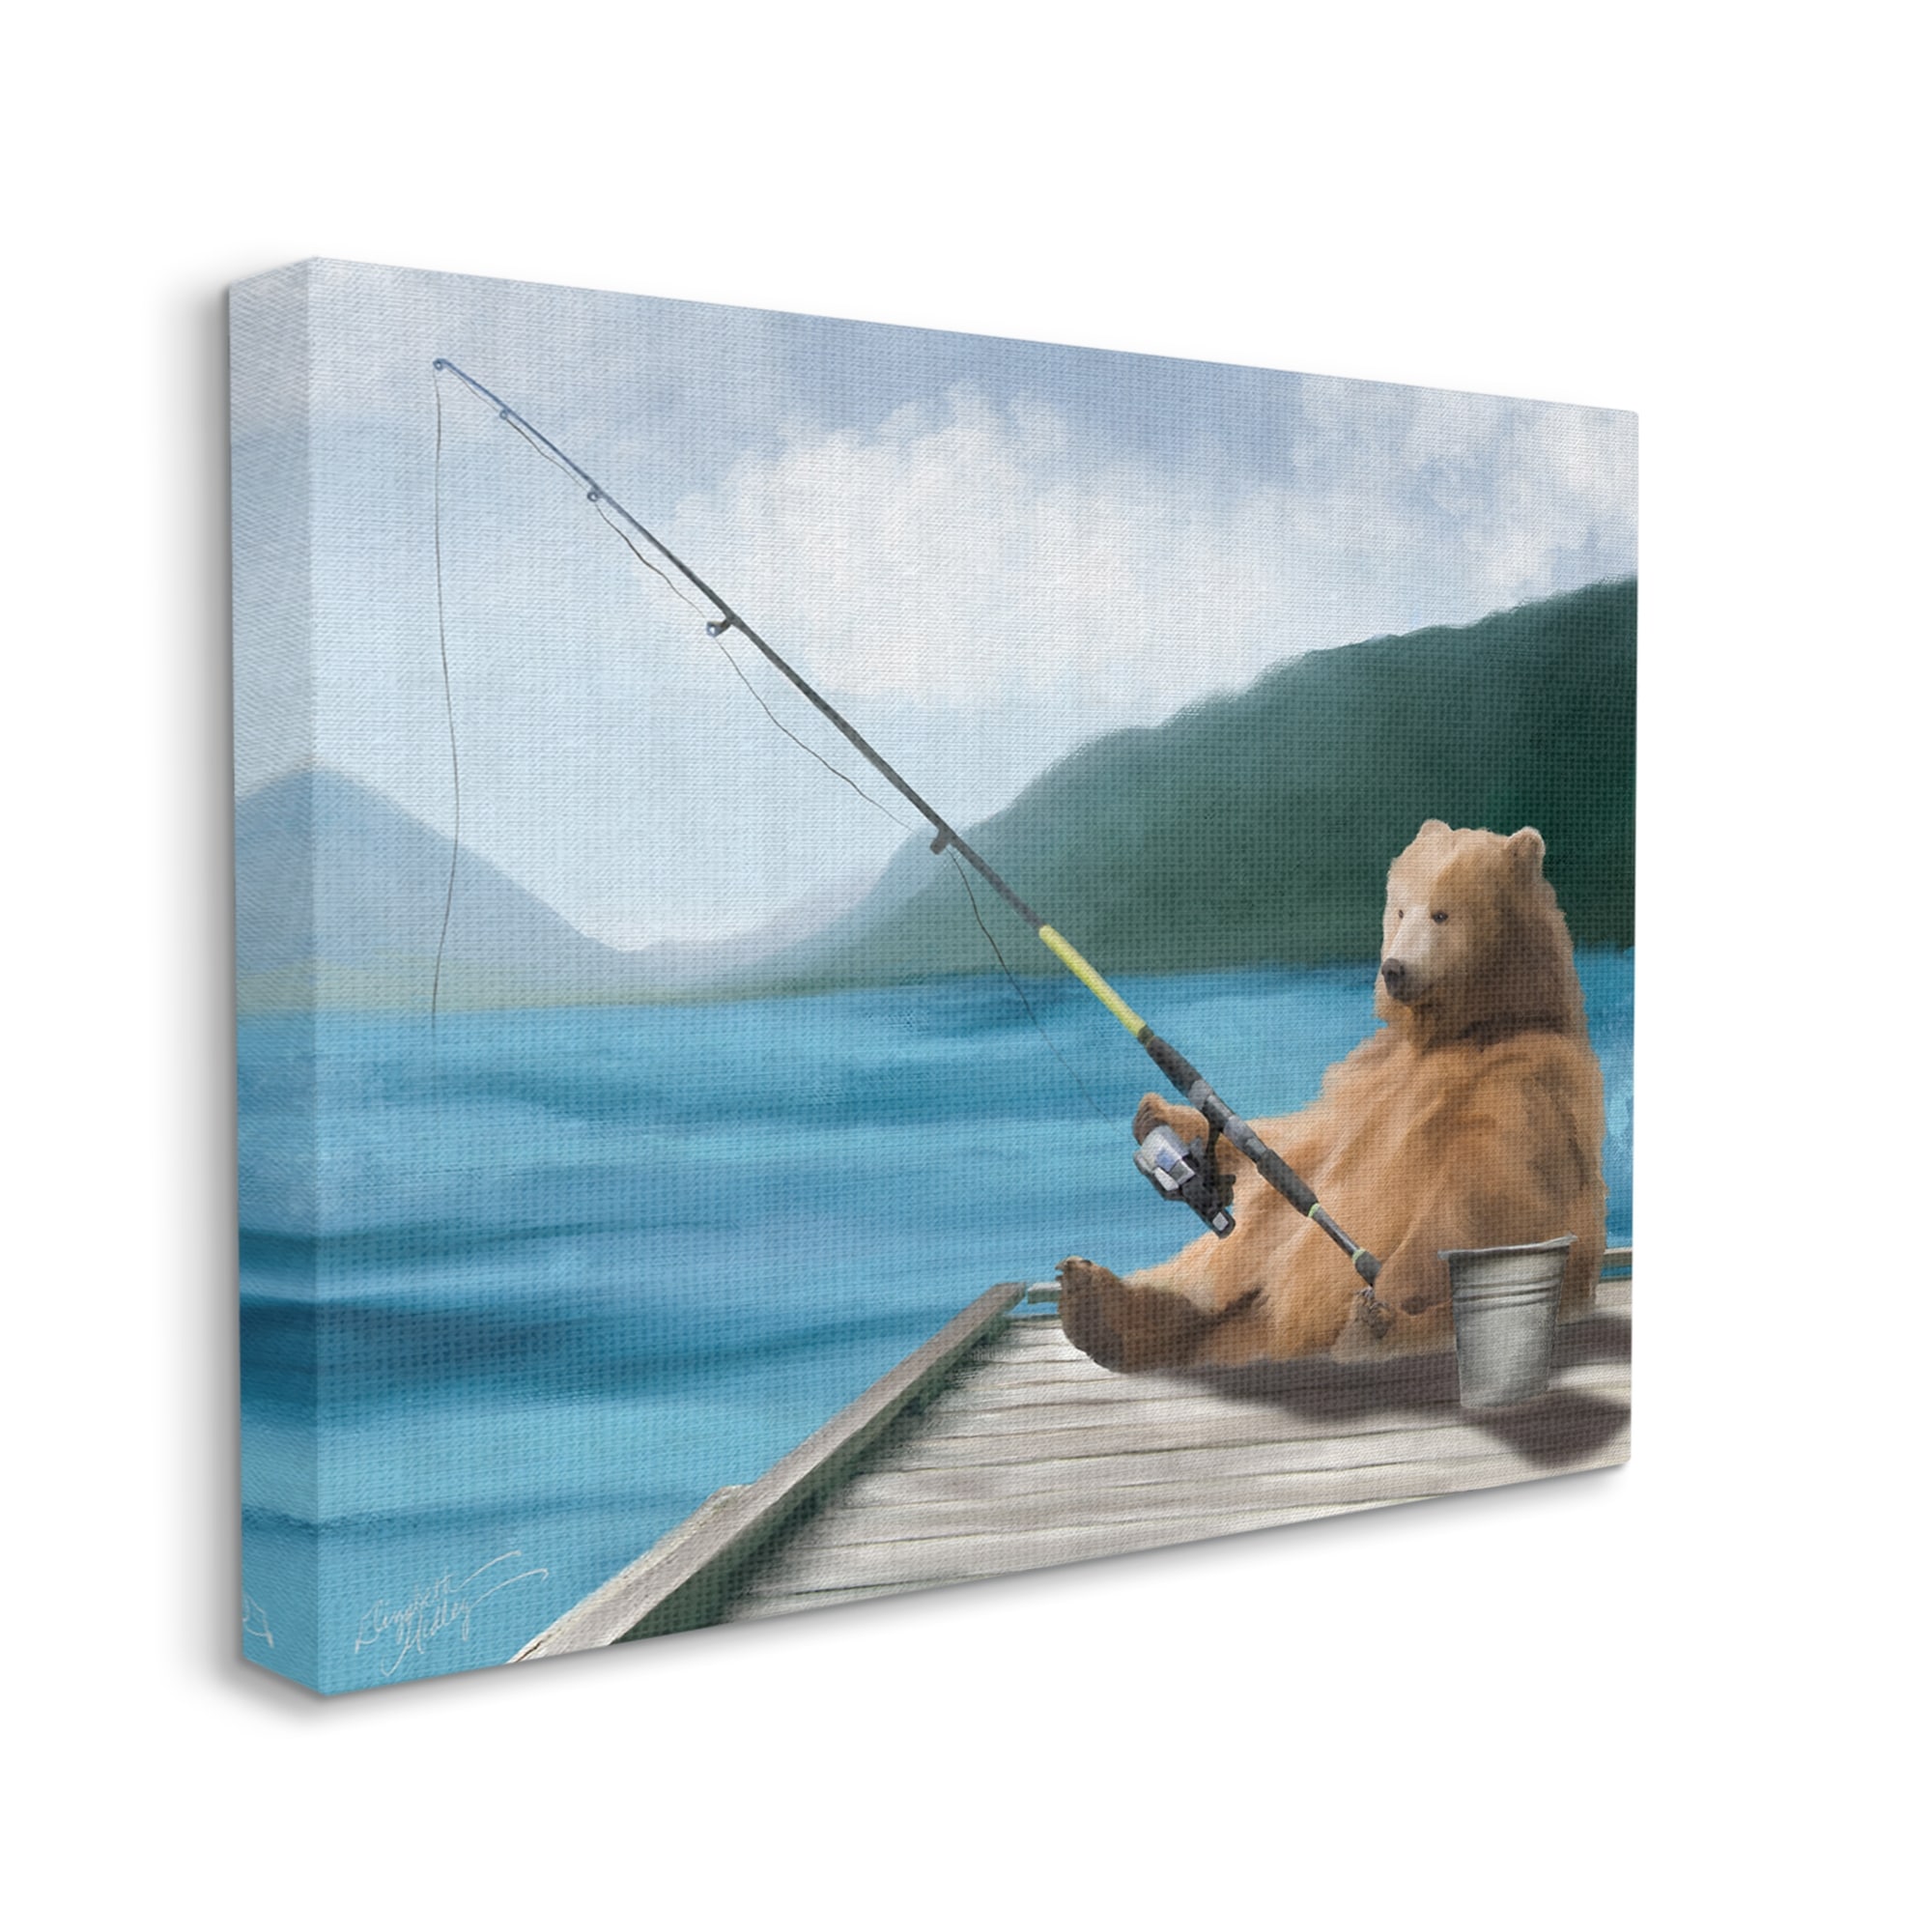 https://ak1.ostkcdn.com/images/products/is/images/direct/cb1fd20d0bebe20e0c246ab0b5cd84f6d715b7e9/Stupell-Industries-Bear-Fishing-Pole-Lake-Dock-Canvas-Wall-Art-by-Elizabeth-Medley.jpg